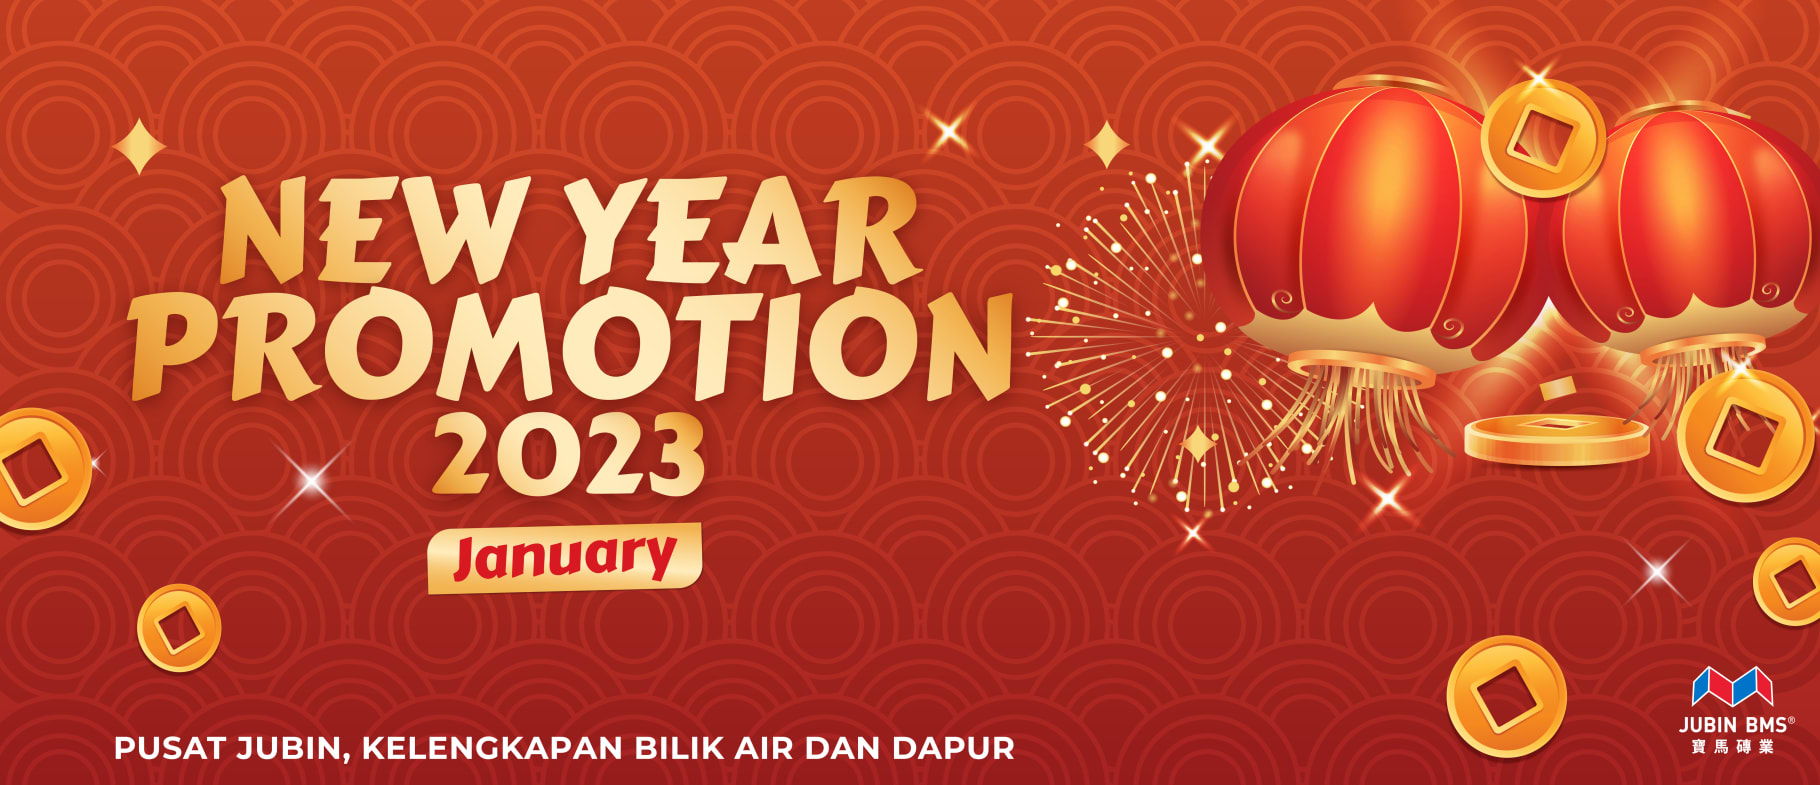 2023 New Year Promotion